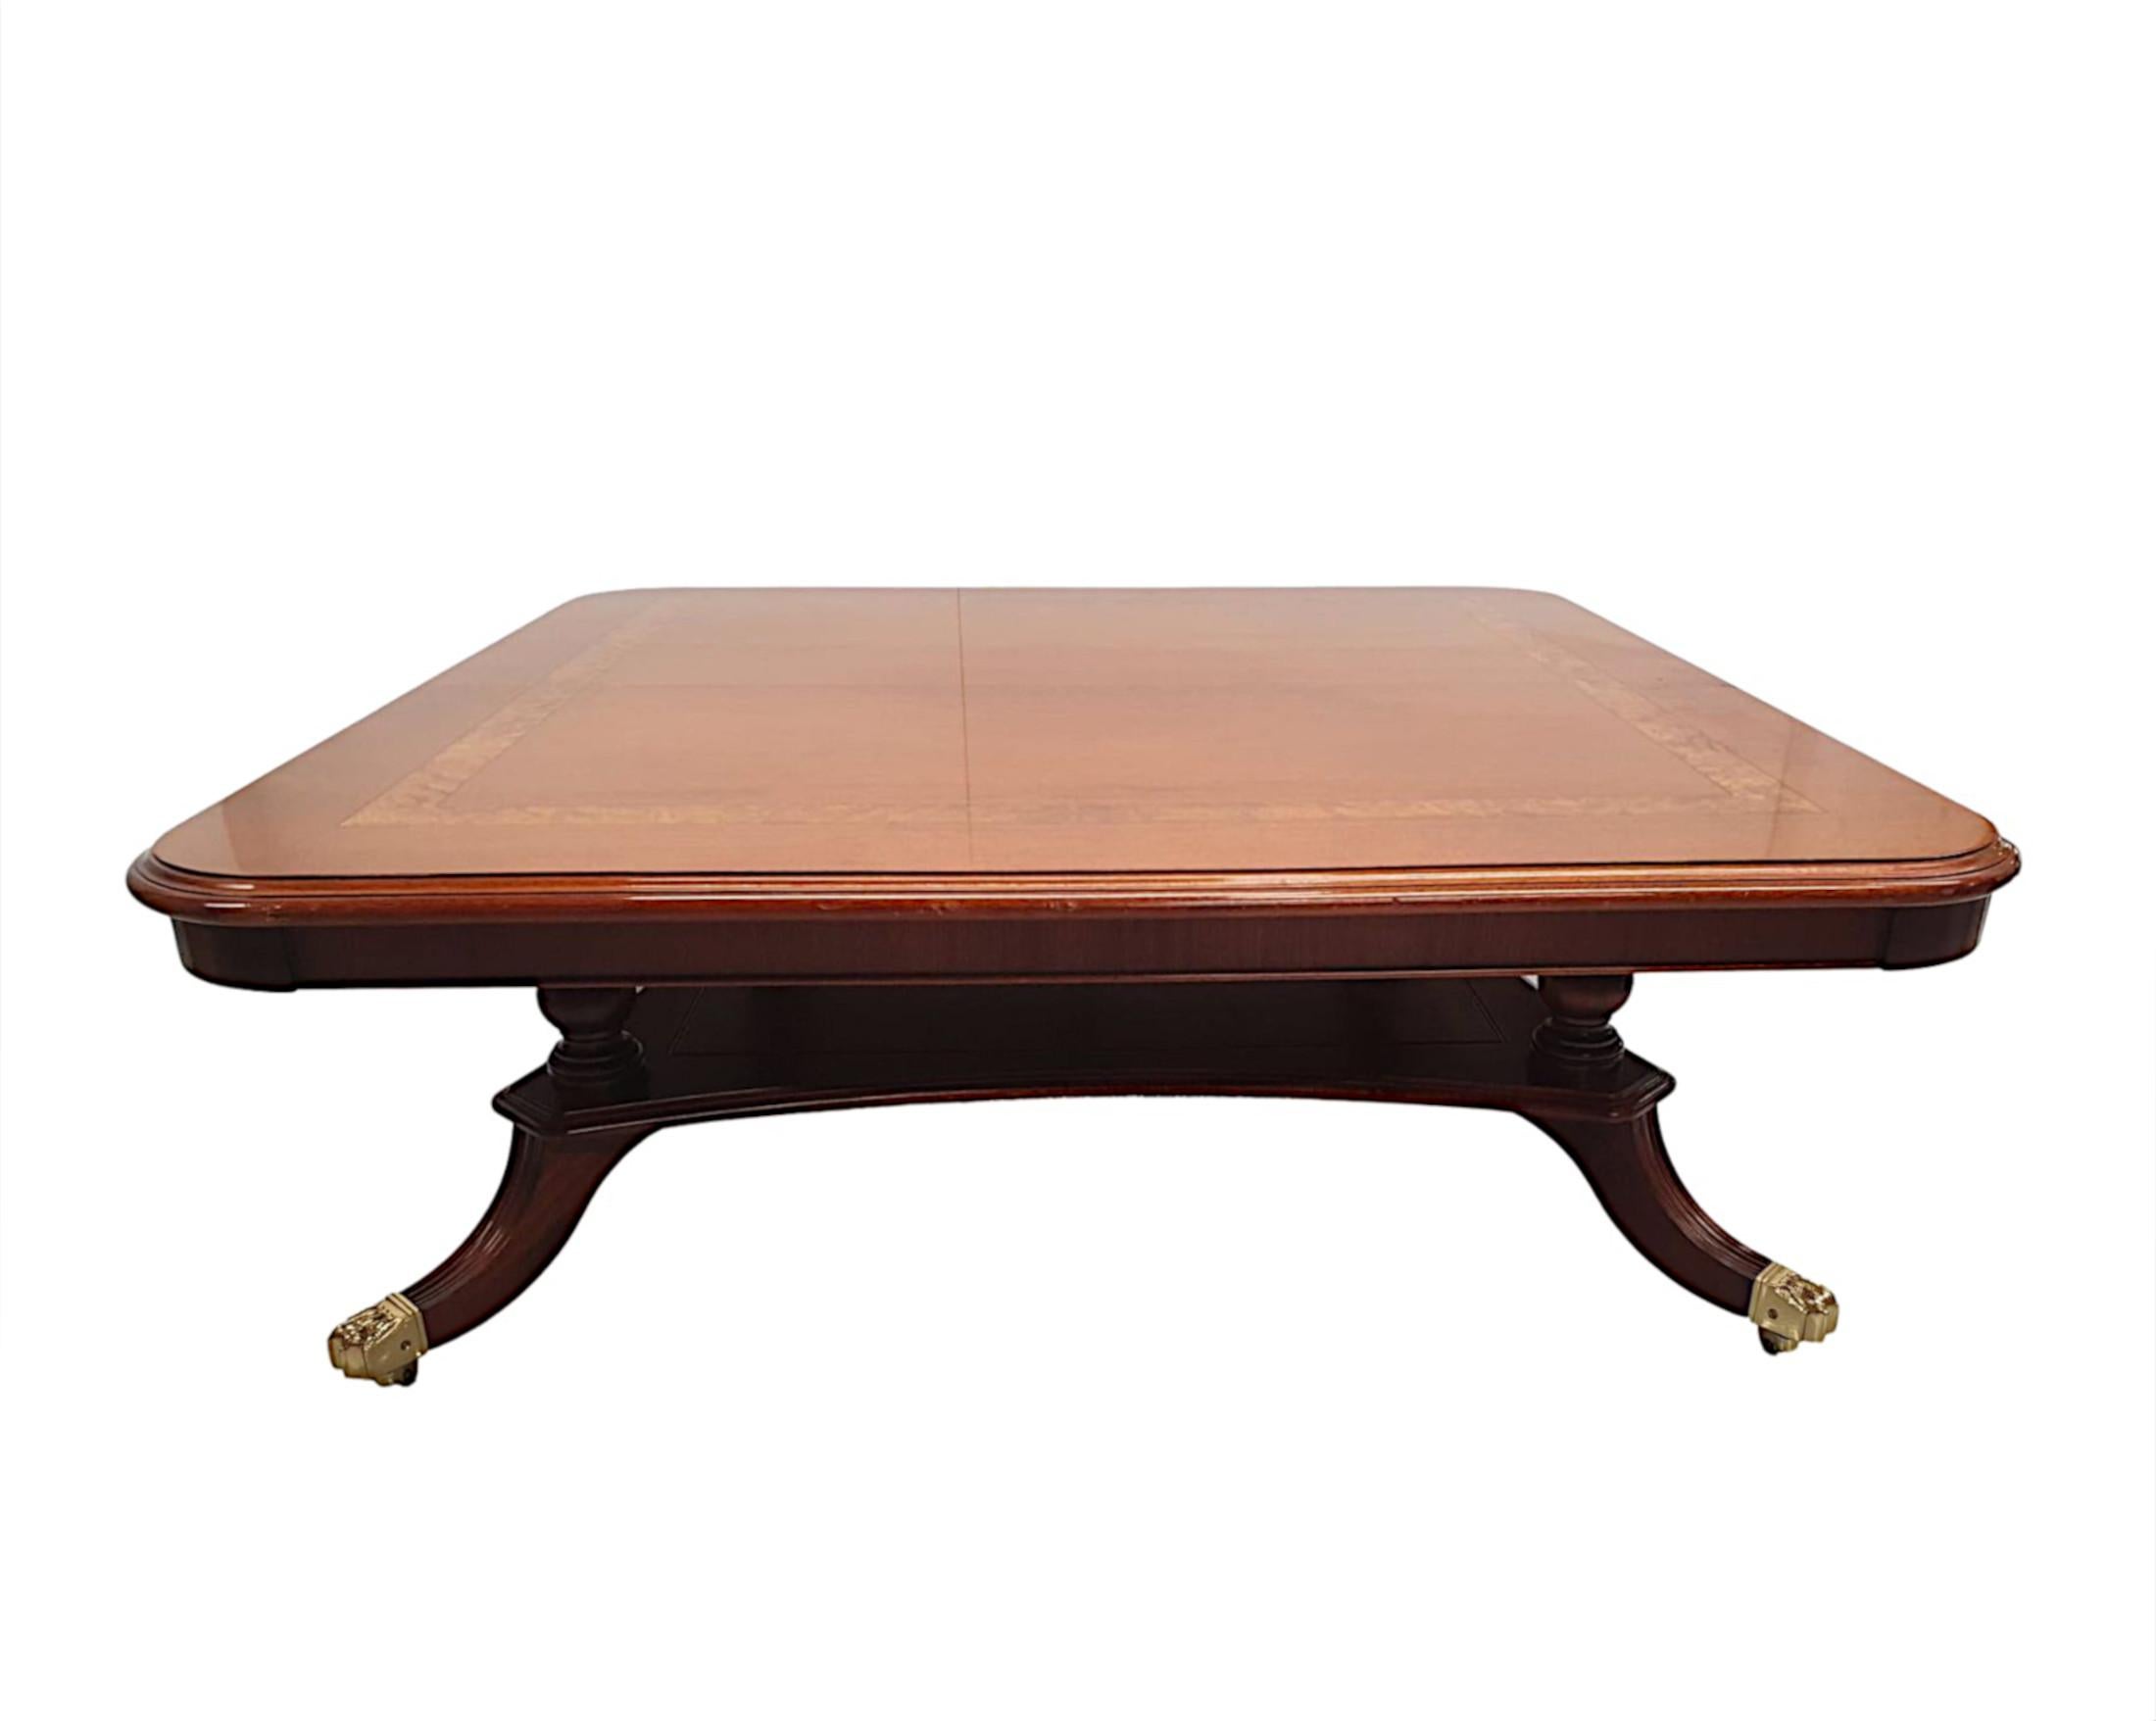 A fabulous hand made 20th century mahogany and walnut coffee table by Charles Barr, UK, finely carved and of fabulous quality with rich patination and grain. The well figured moulded and crossbanded top of square form raised above beautiful ring